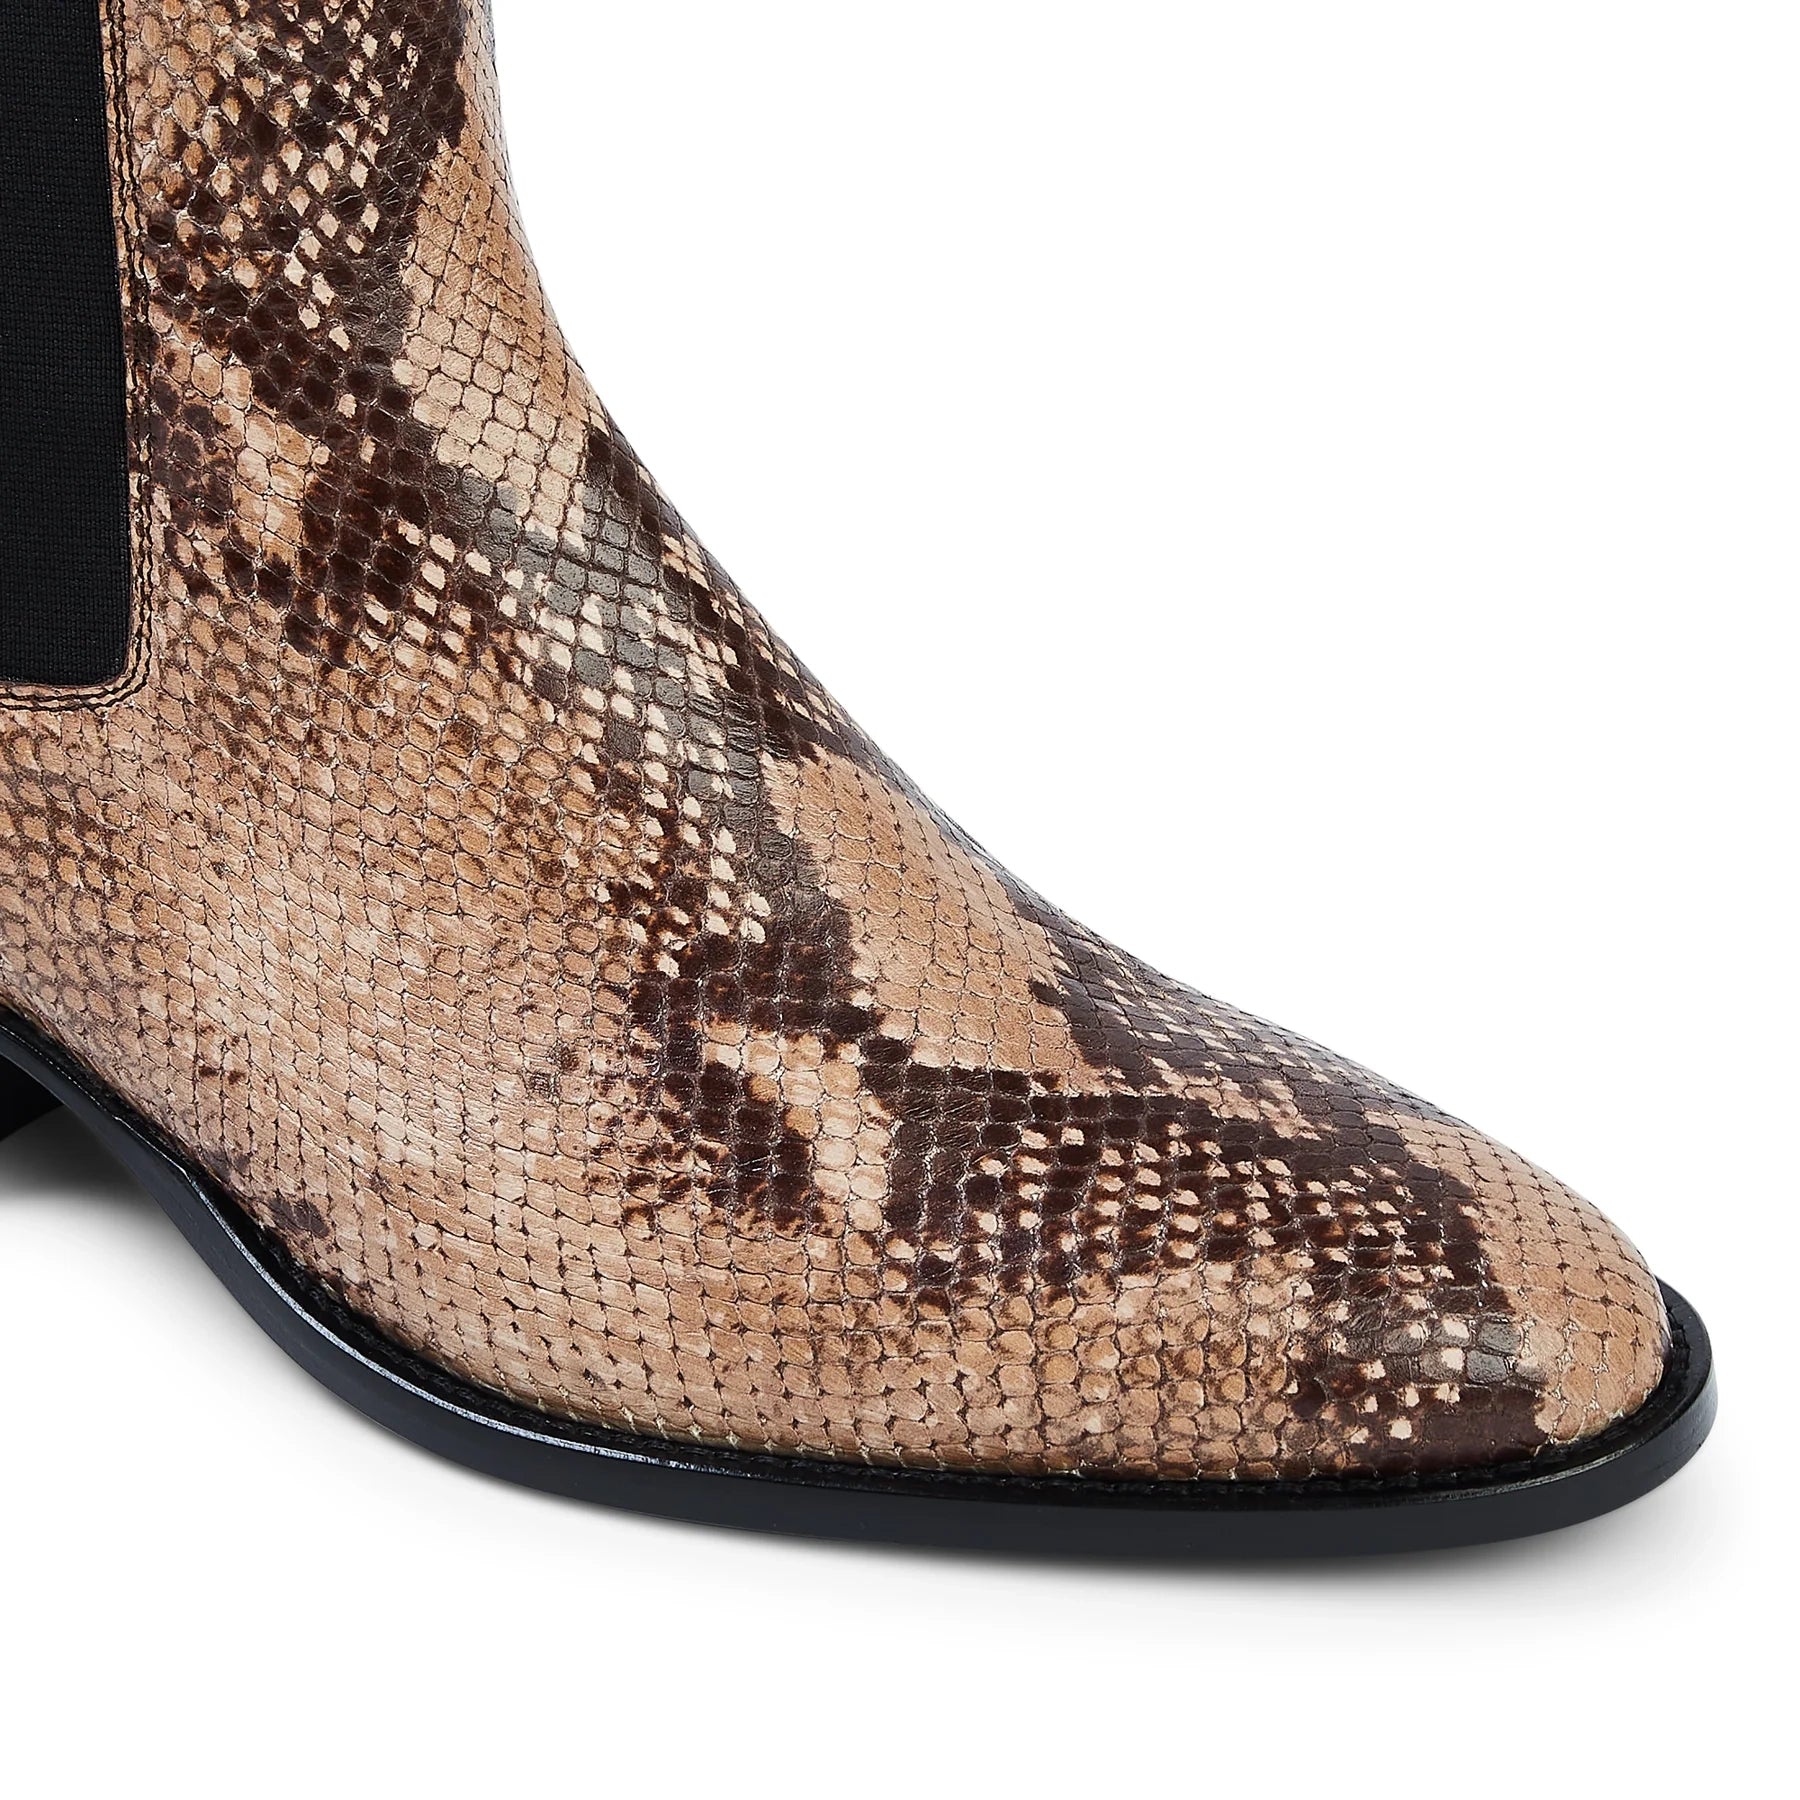 Chelsea Boot - Beige Snake-Effect Leather